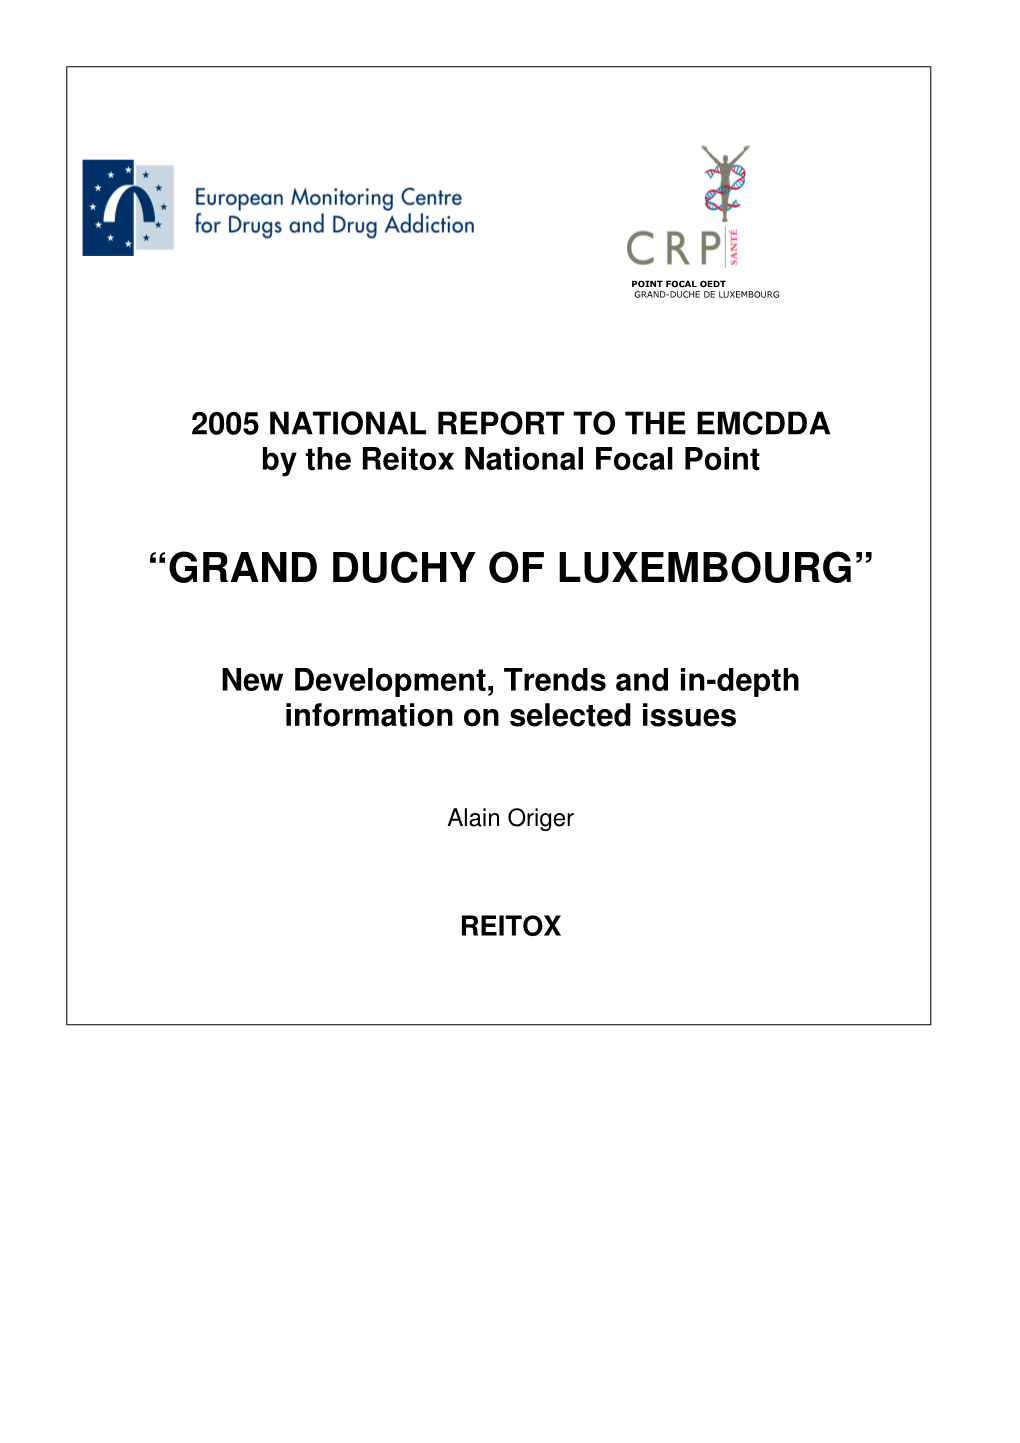 “Grand Duchy of Luxembourg”